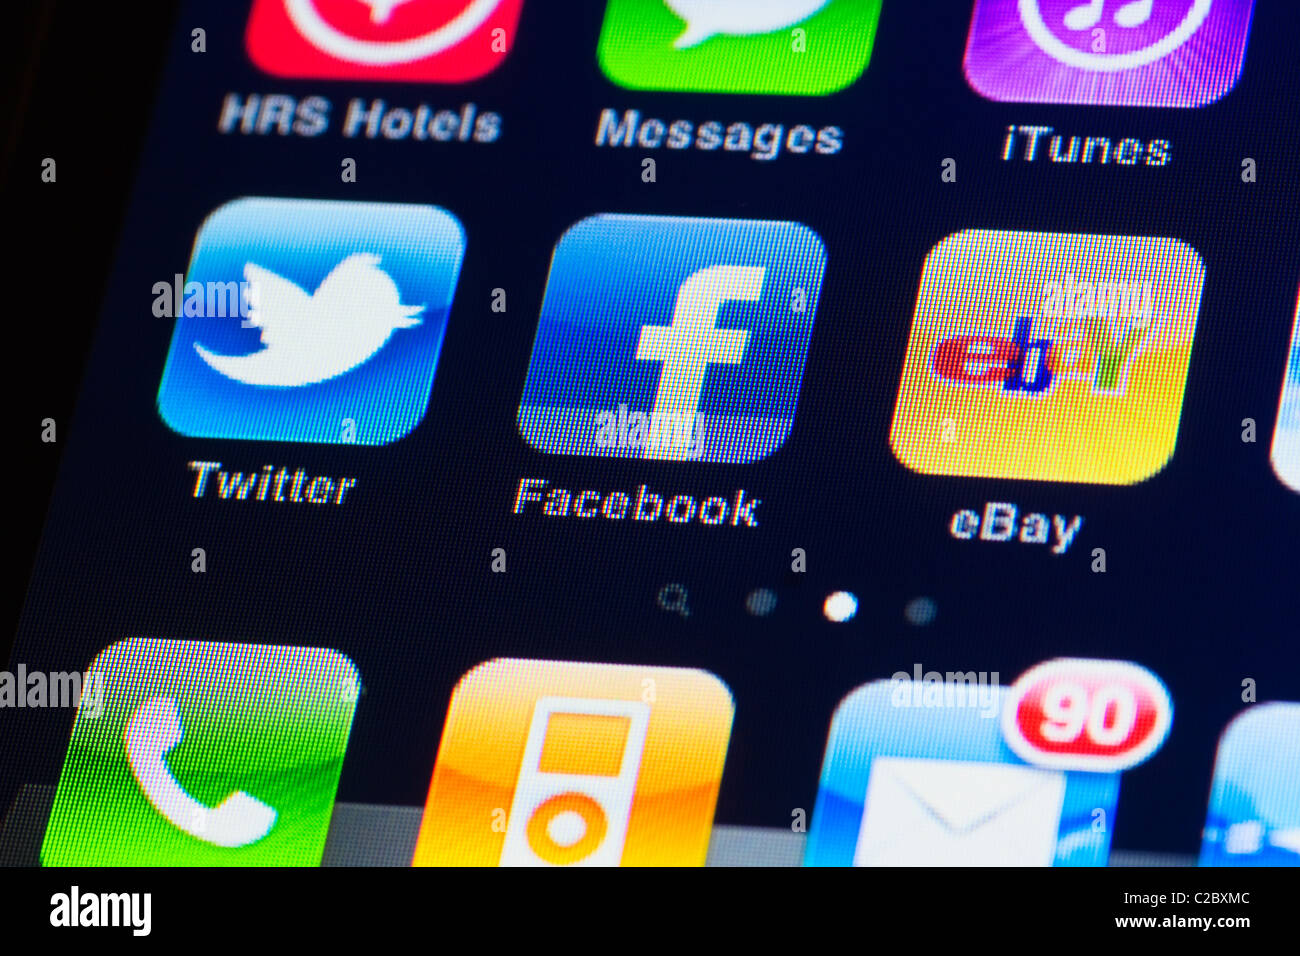 Detail macro image of the iphone touch screen. Display shows apps from facebook, twitter, ebay, itunes and messages Stock Photo